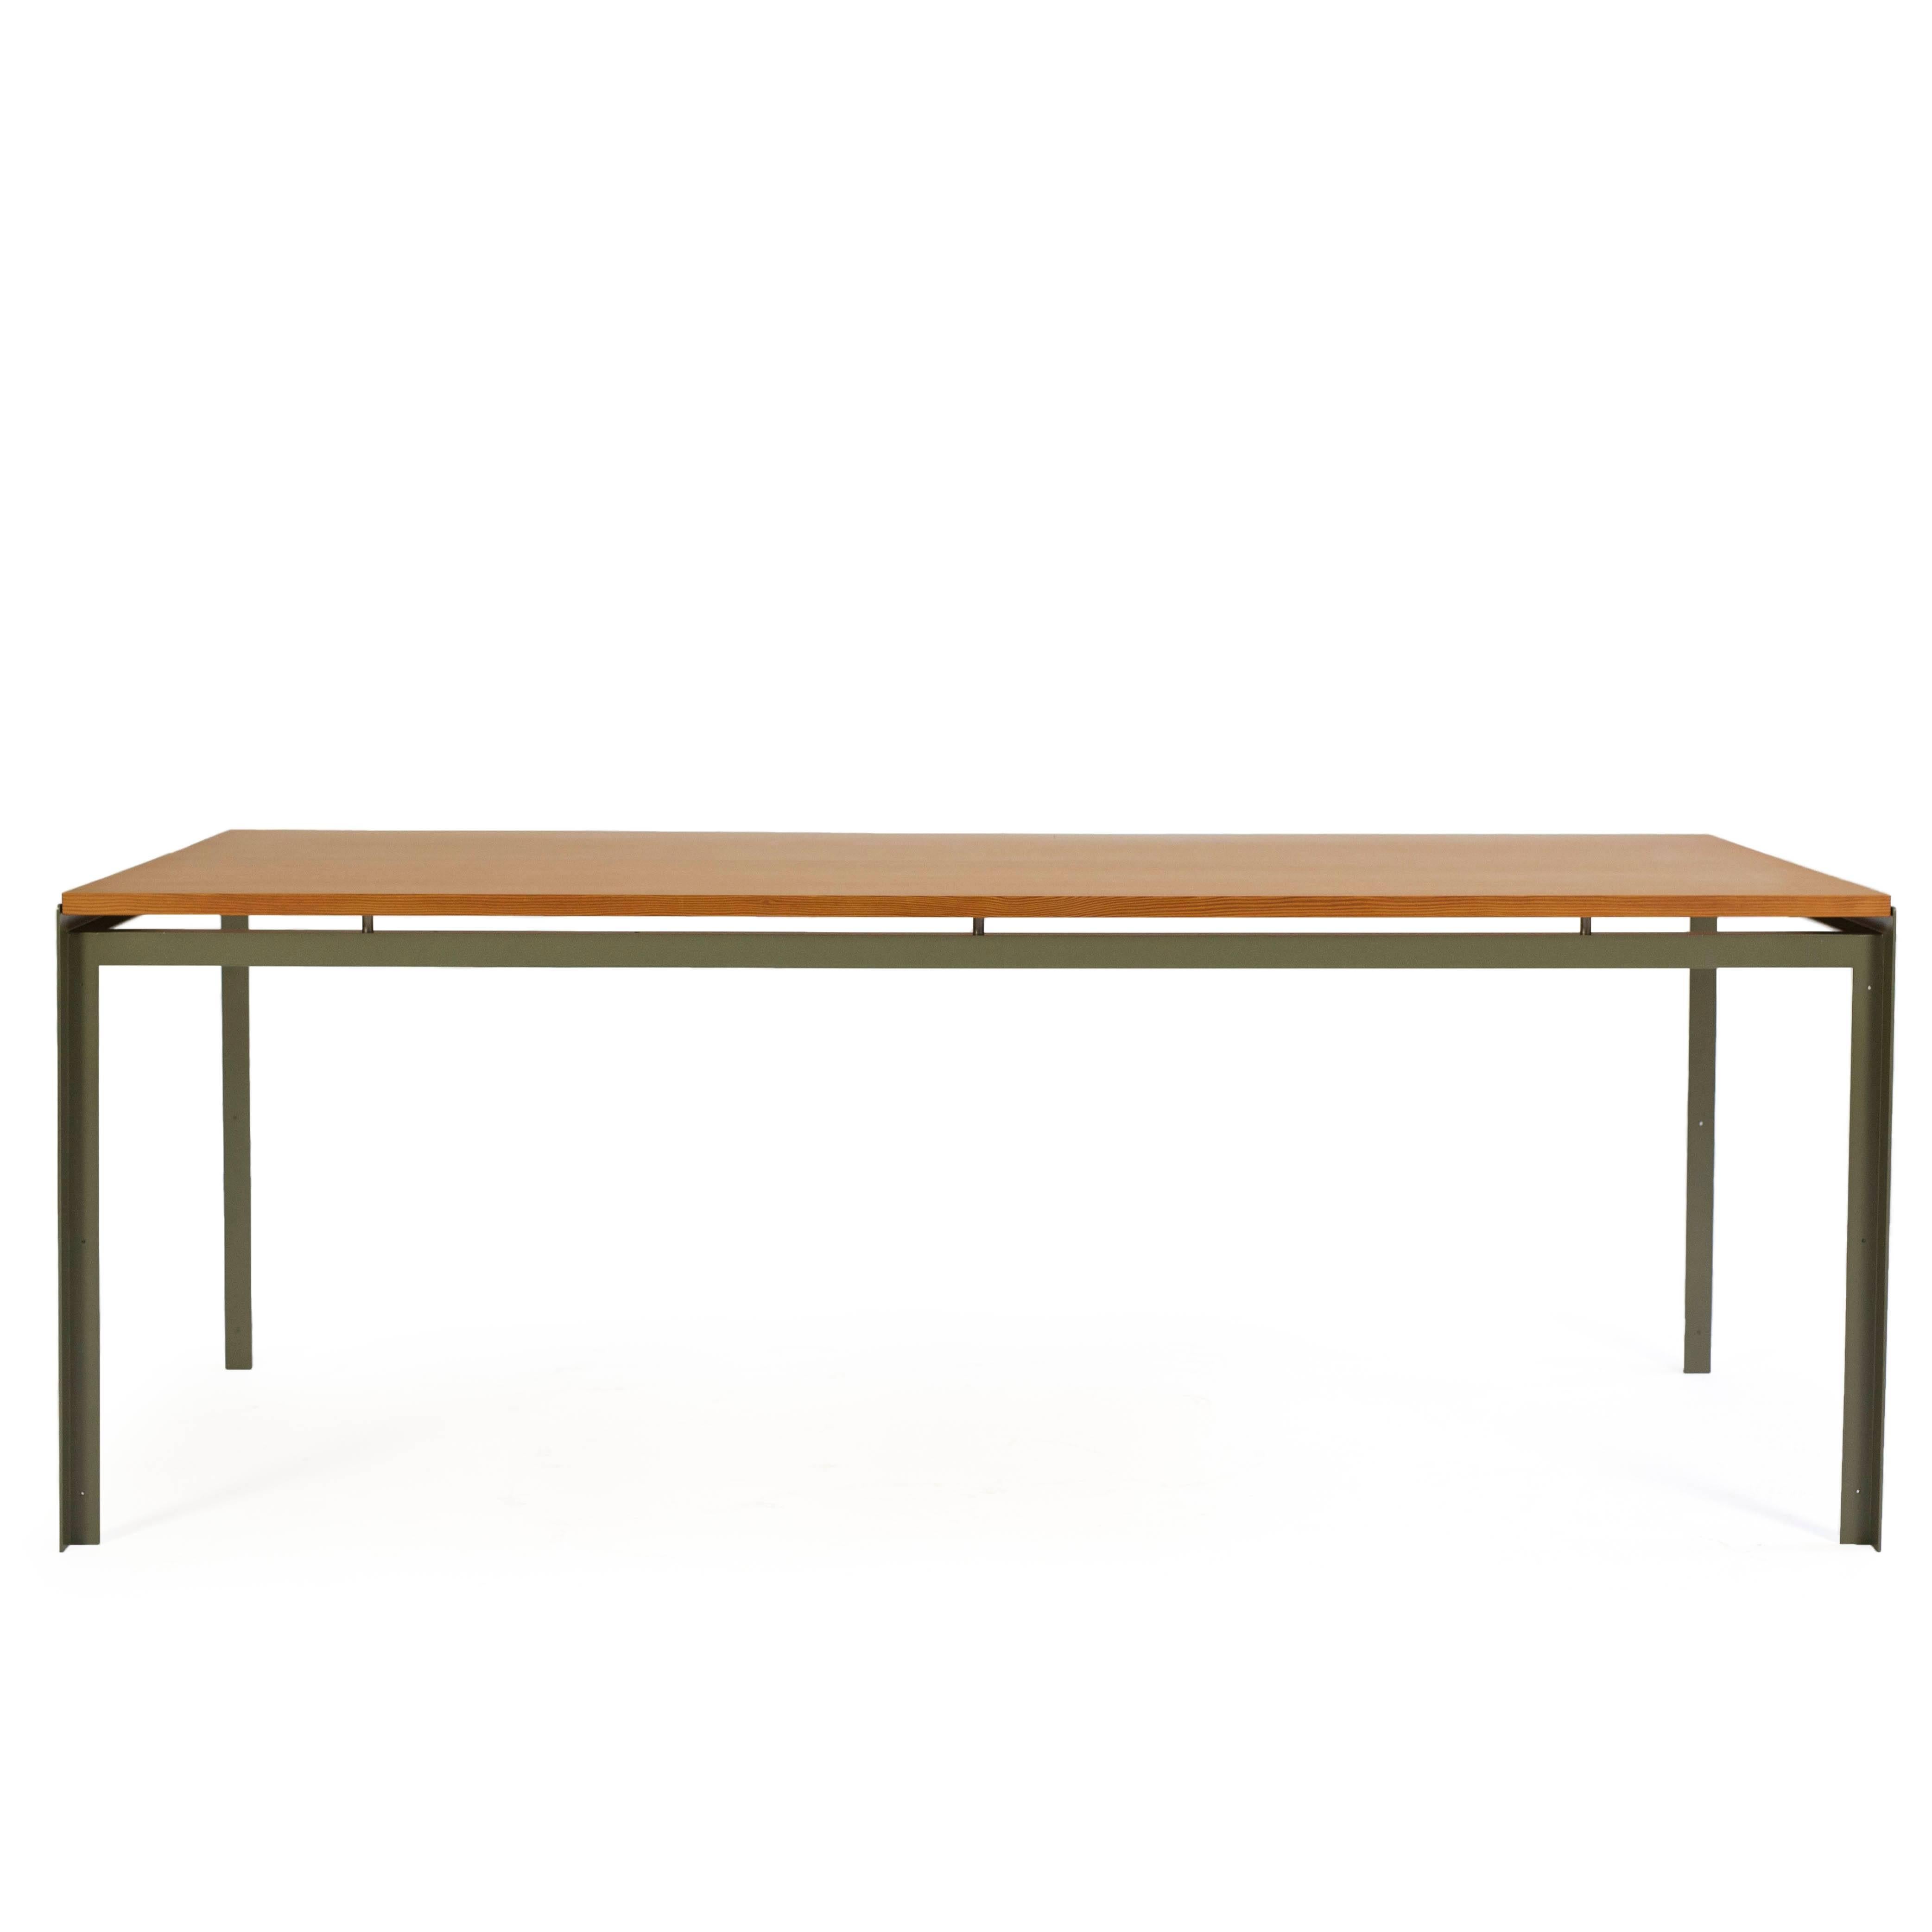 Poul Kjaerholm 'Professor's' desk with grey lacquered metal frame and top of Oregonpine. 

Designed by Poul Kjaerholm for the Royal Danish Academy of Fine art in Copenhagen, Denmark in 1955, executed by Rud. Rasmussen cabinetmakers. 
 